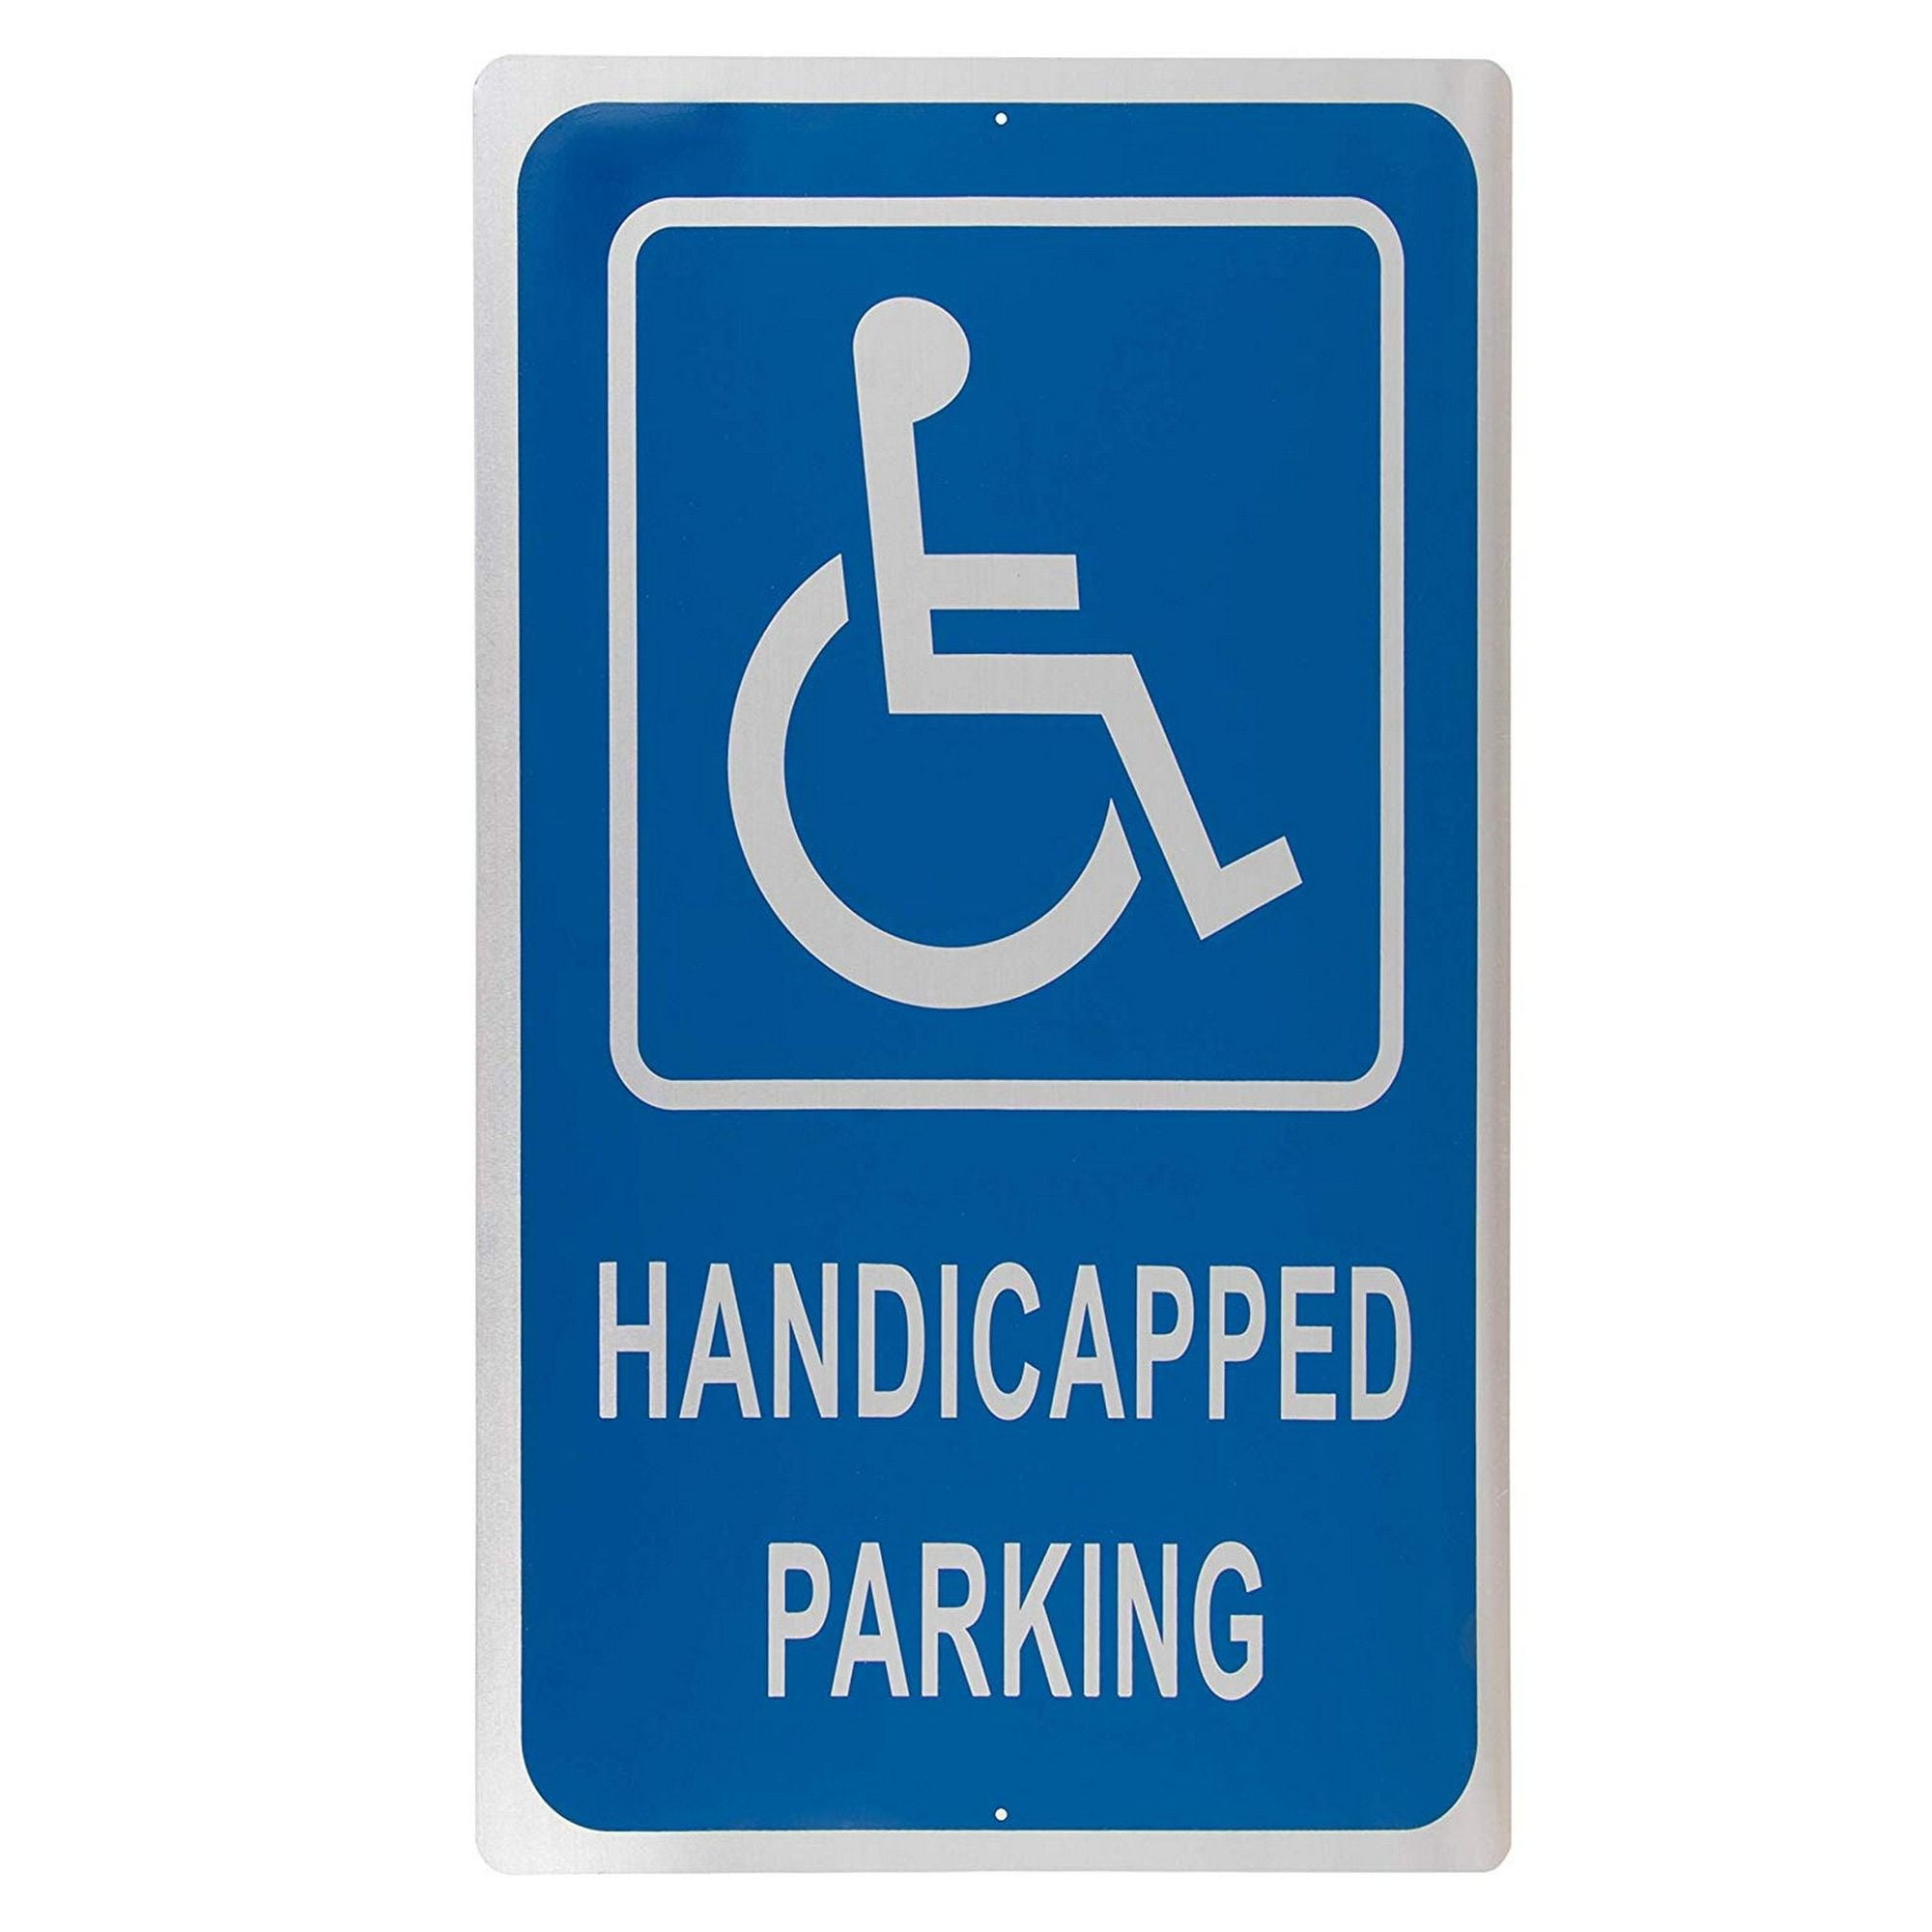 No Parking This Space Reserved Wall Art Decor Novelty Notice Aluminum Metal Sign